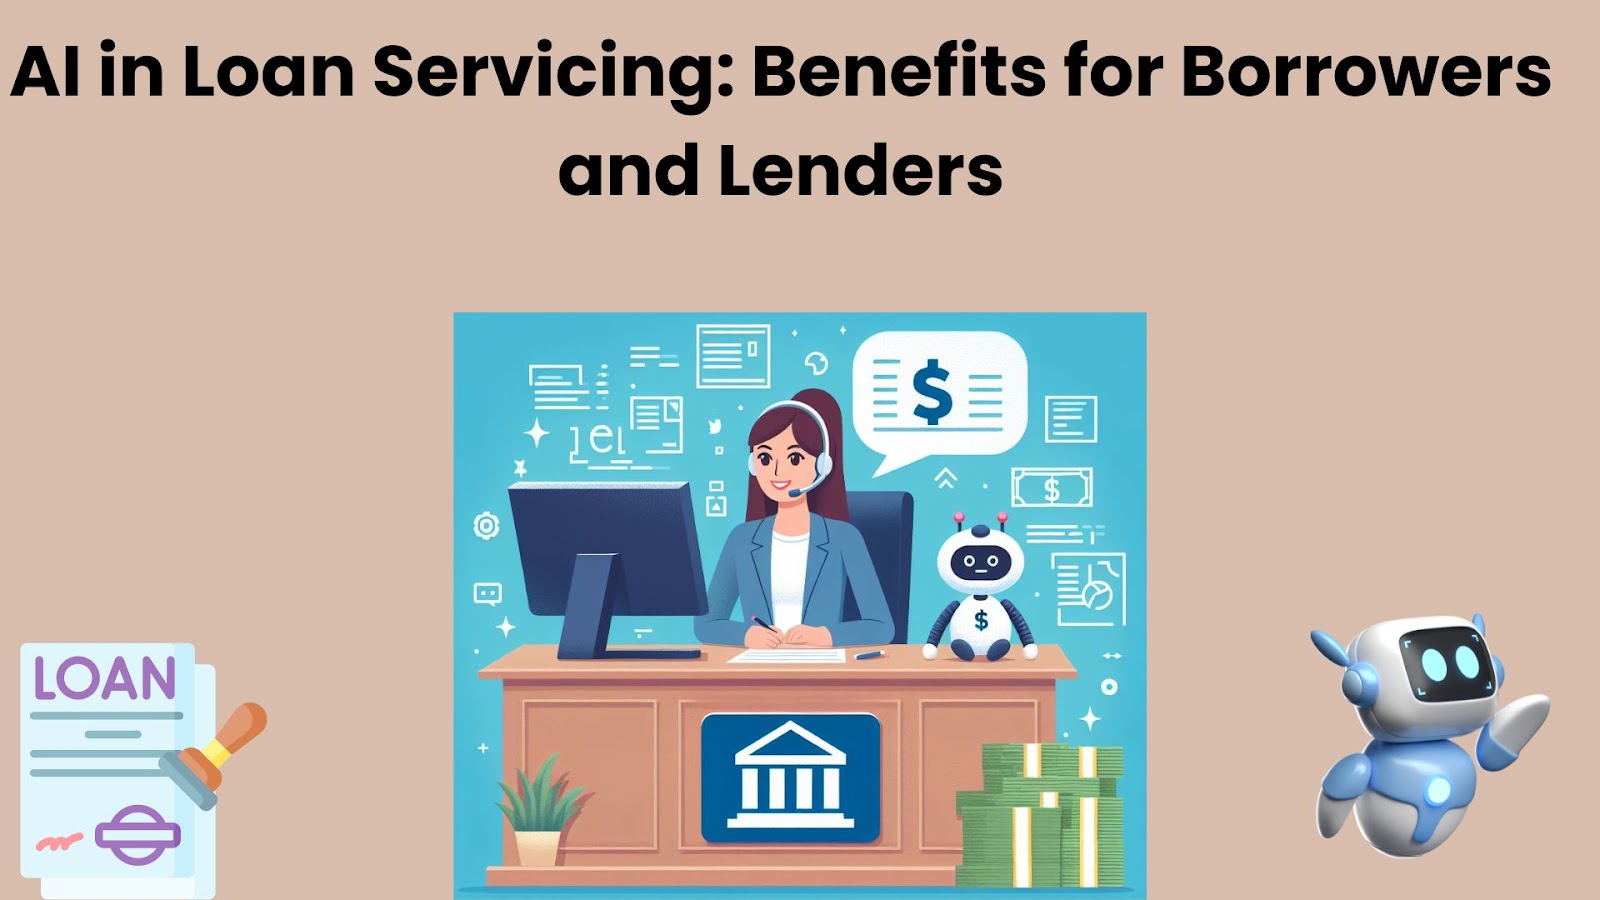 AI in Loan Servicing: Benefits for Borrowers and Lenders